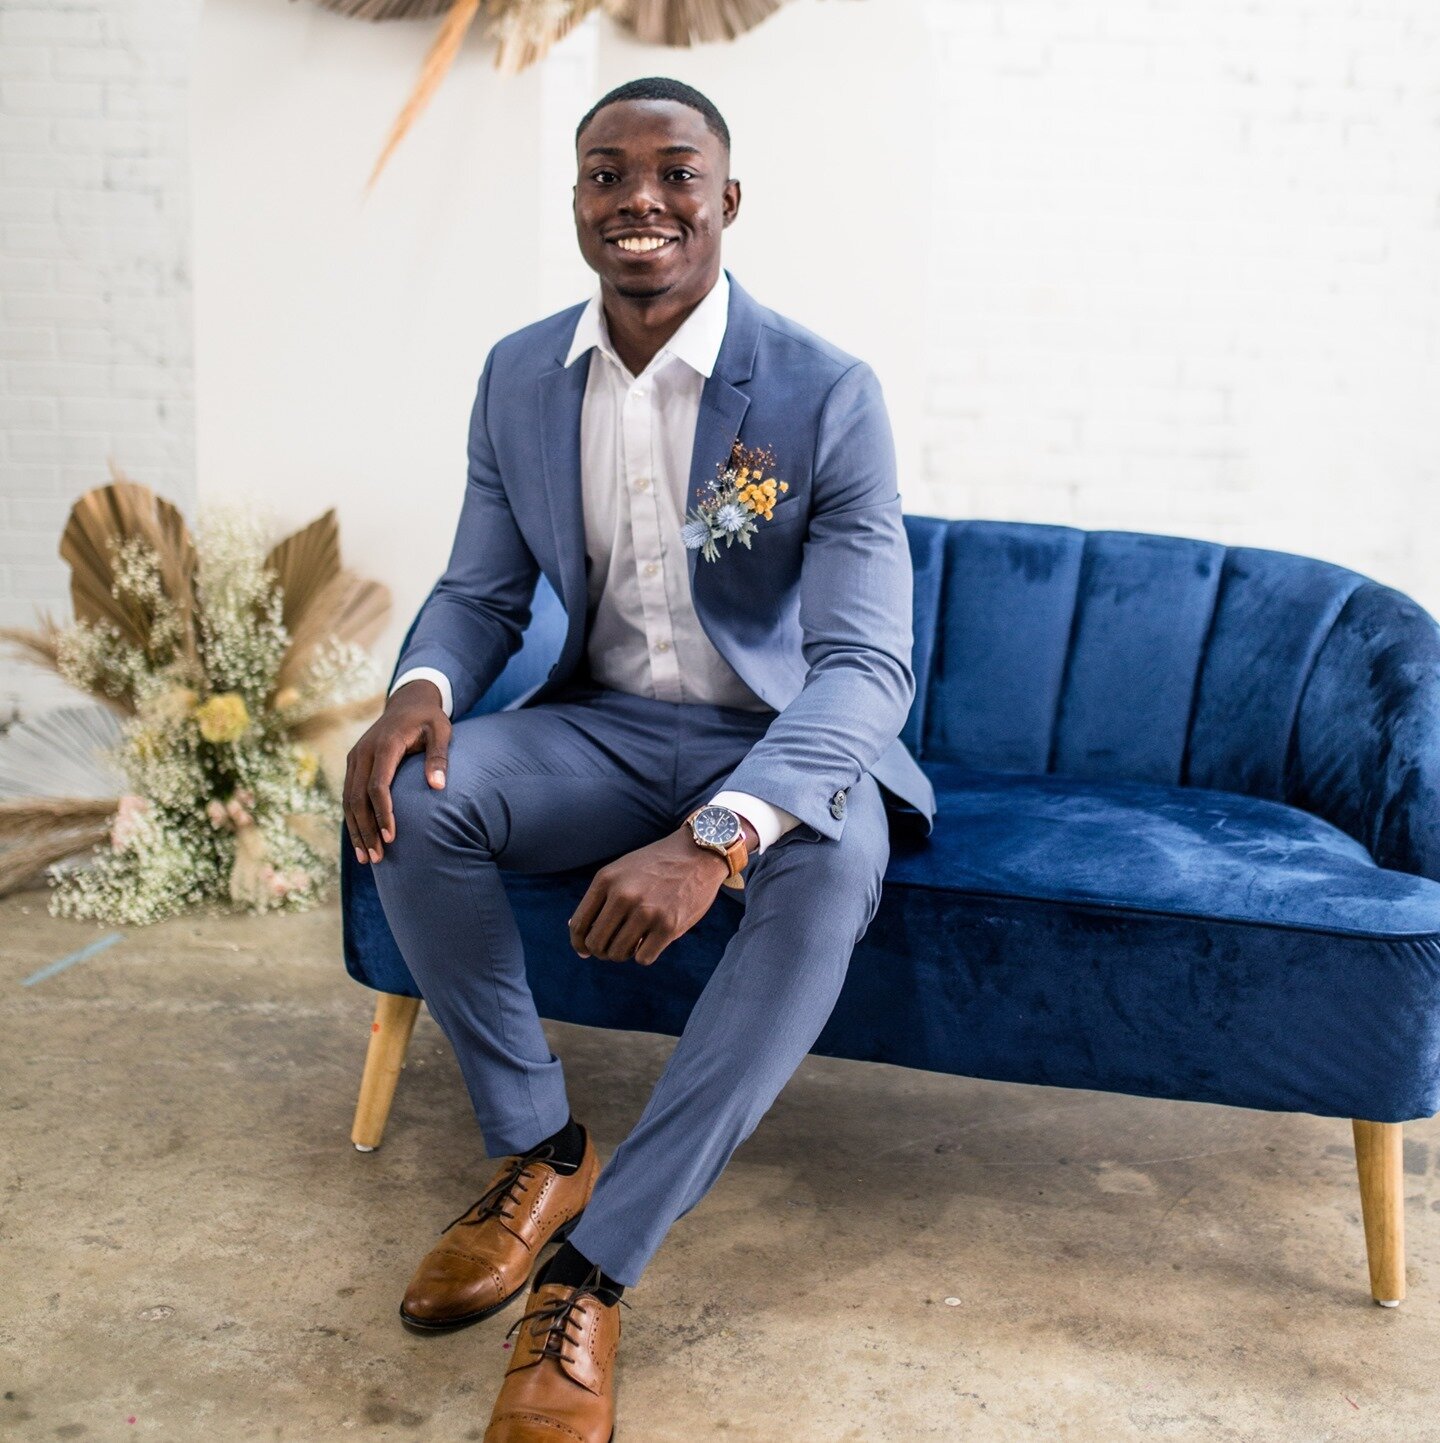 A wedding trend that I am loving is men wearing colored suits! A classic black suit is a timeless look. But color has been catching my eye lately! I've seen baby blue, emerald green and rosy peaches as colors for grooms. What's a color that you'd lik